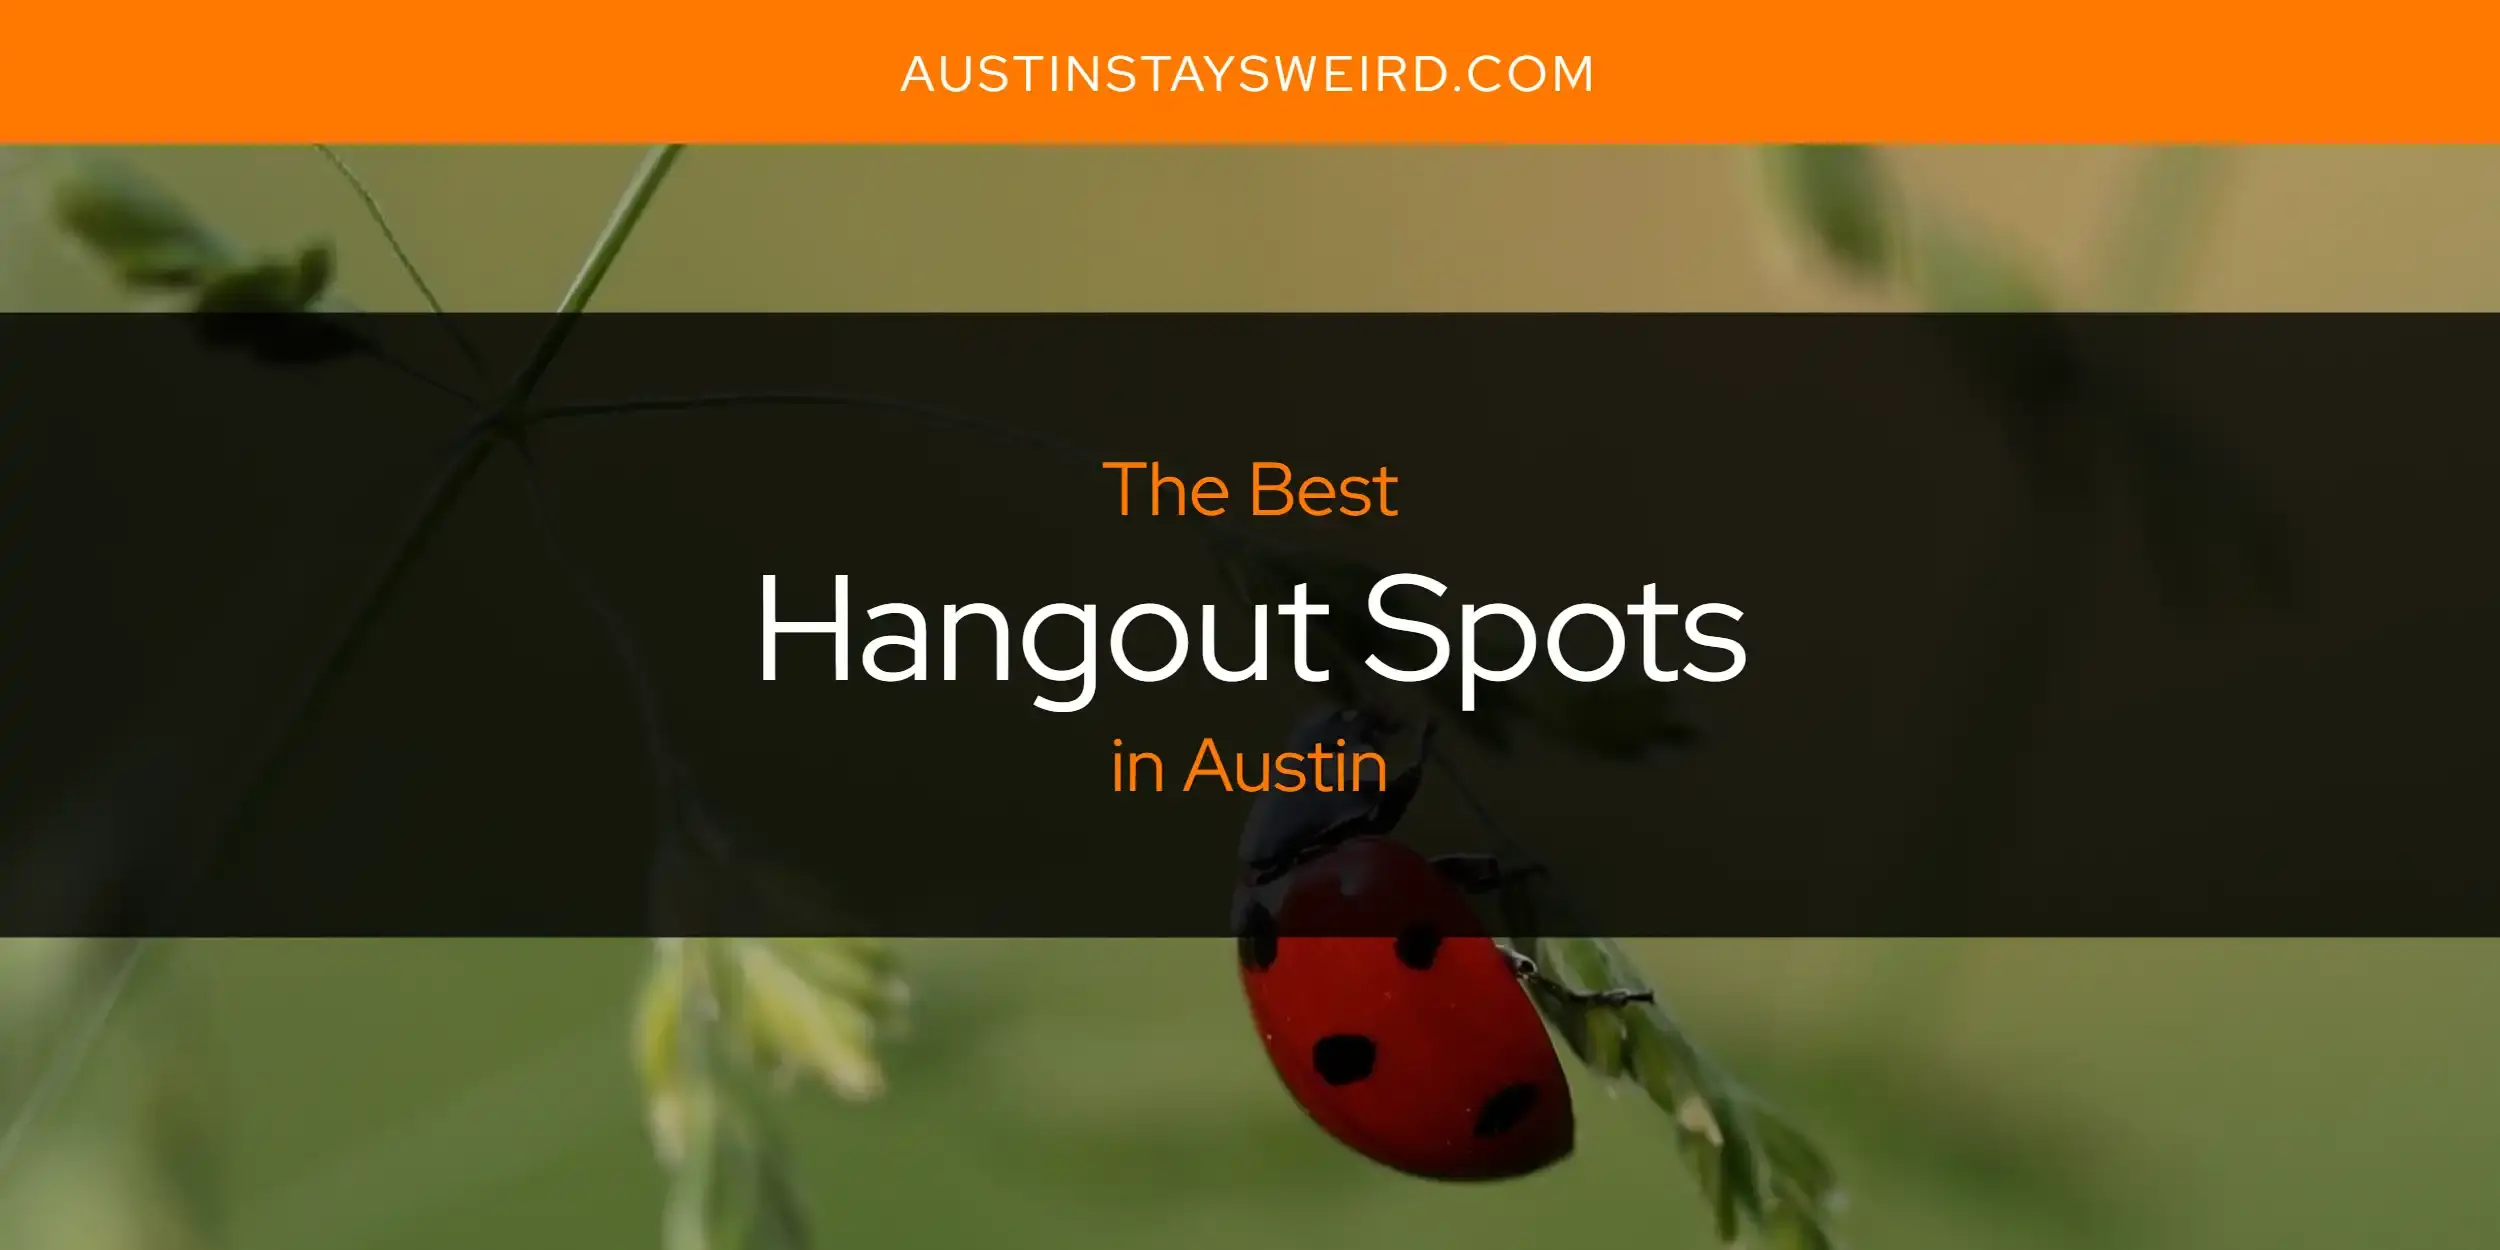 Best Hangout Spots in Austin? Here's the Top 8